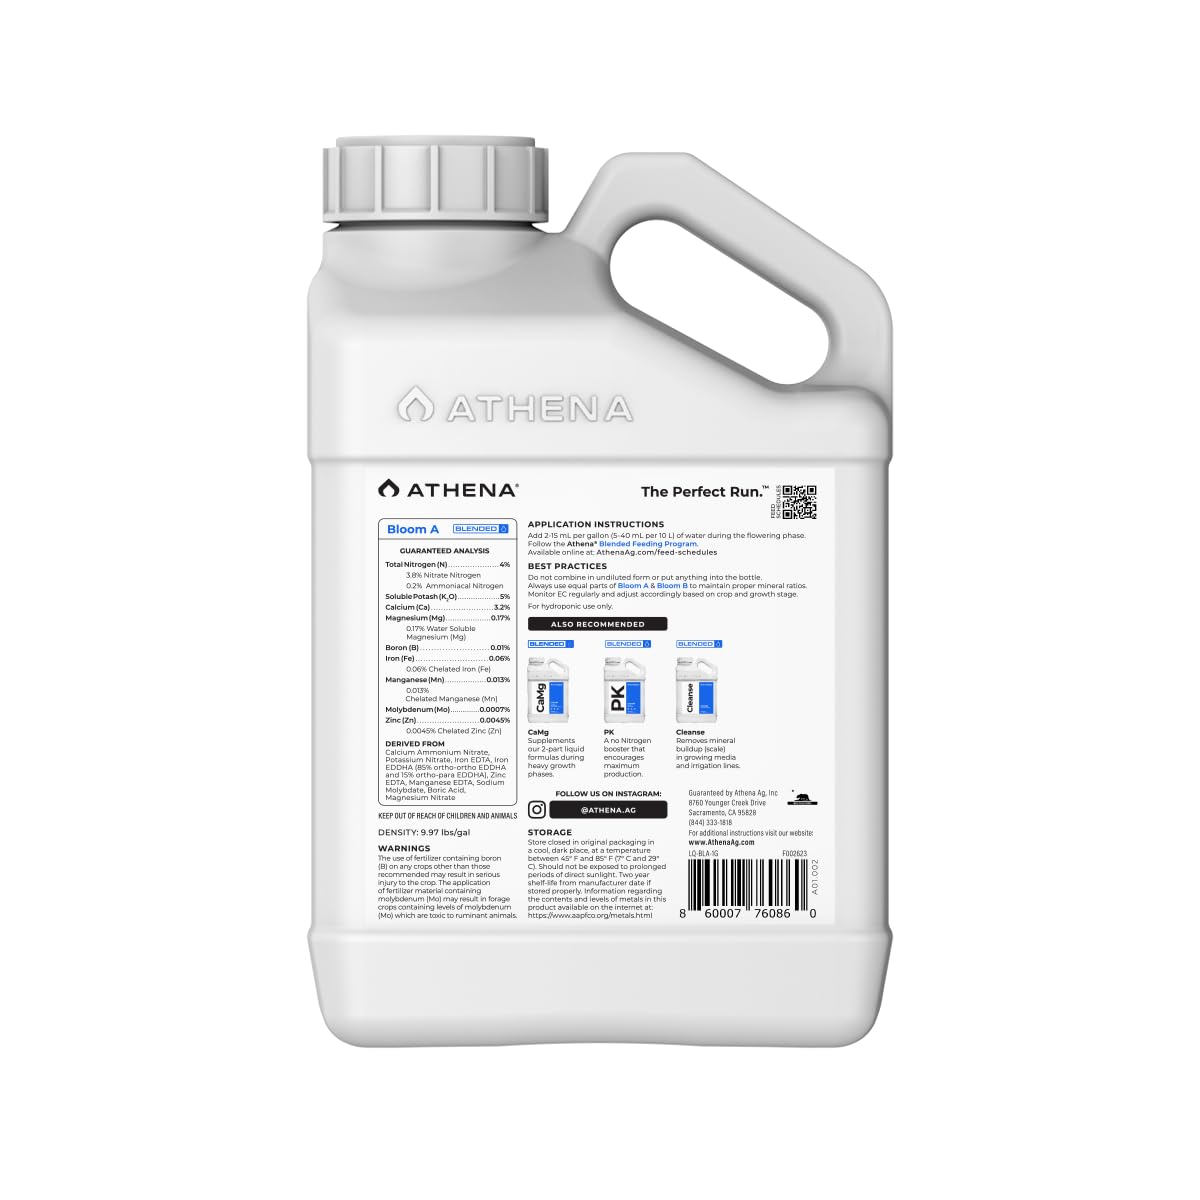 Athena Bloom A, Blended, 1 Gallon